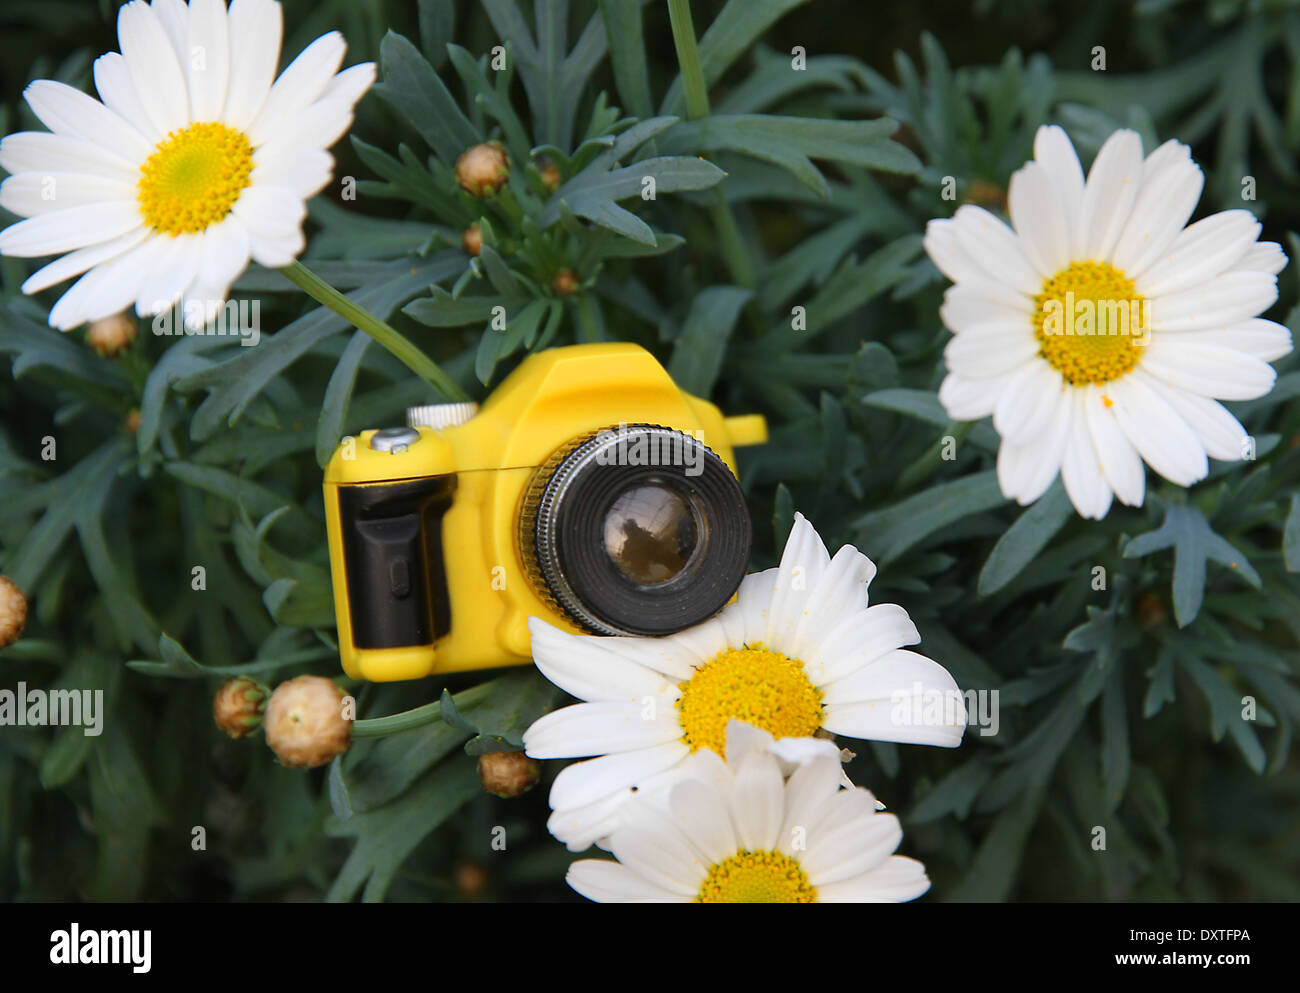 small yellow toy camera among the daisies flowers Stock Photo